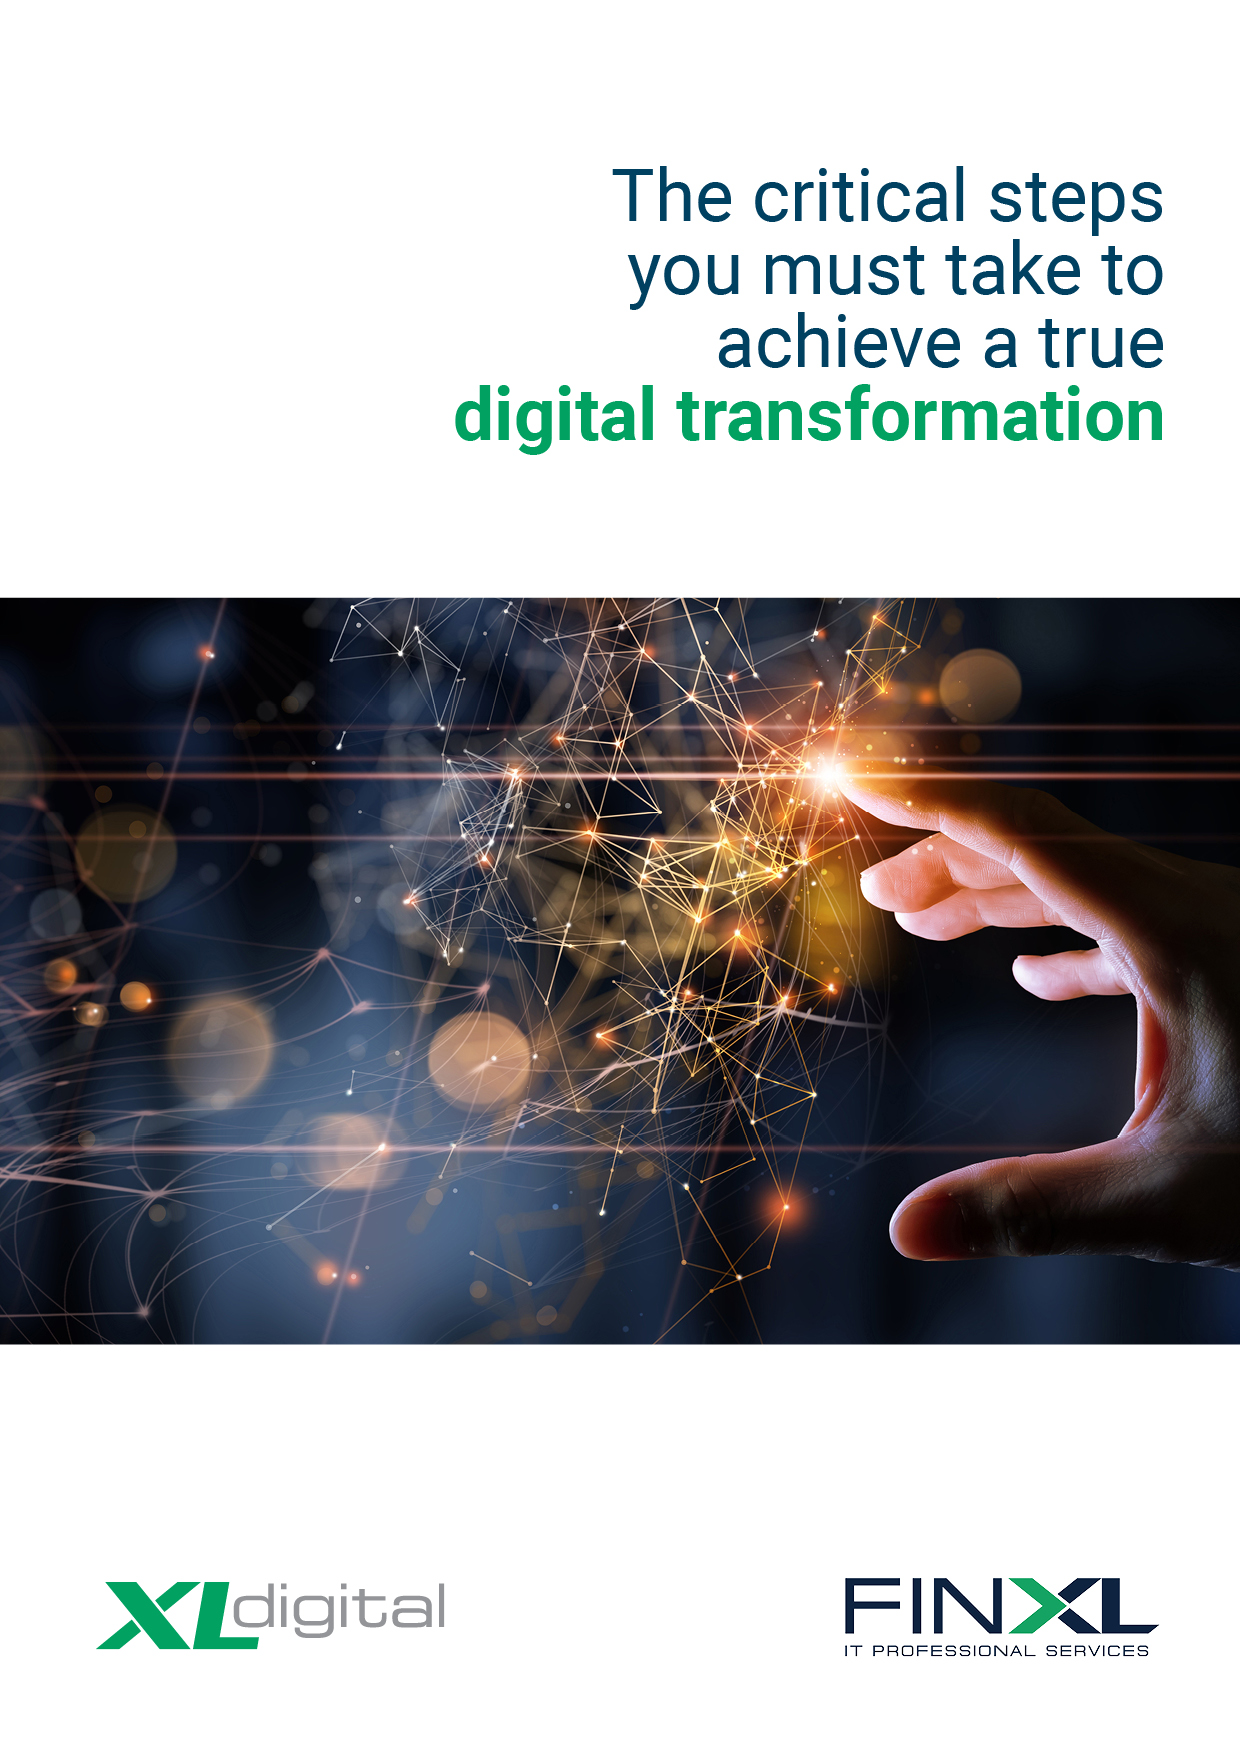 The critical steps you must take to achieve a true digital transformation